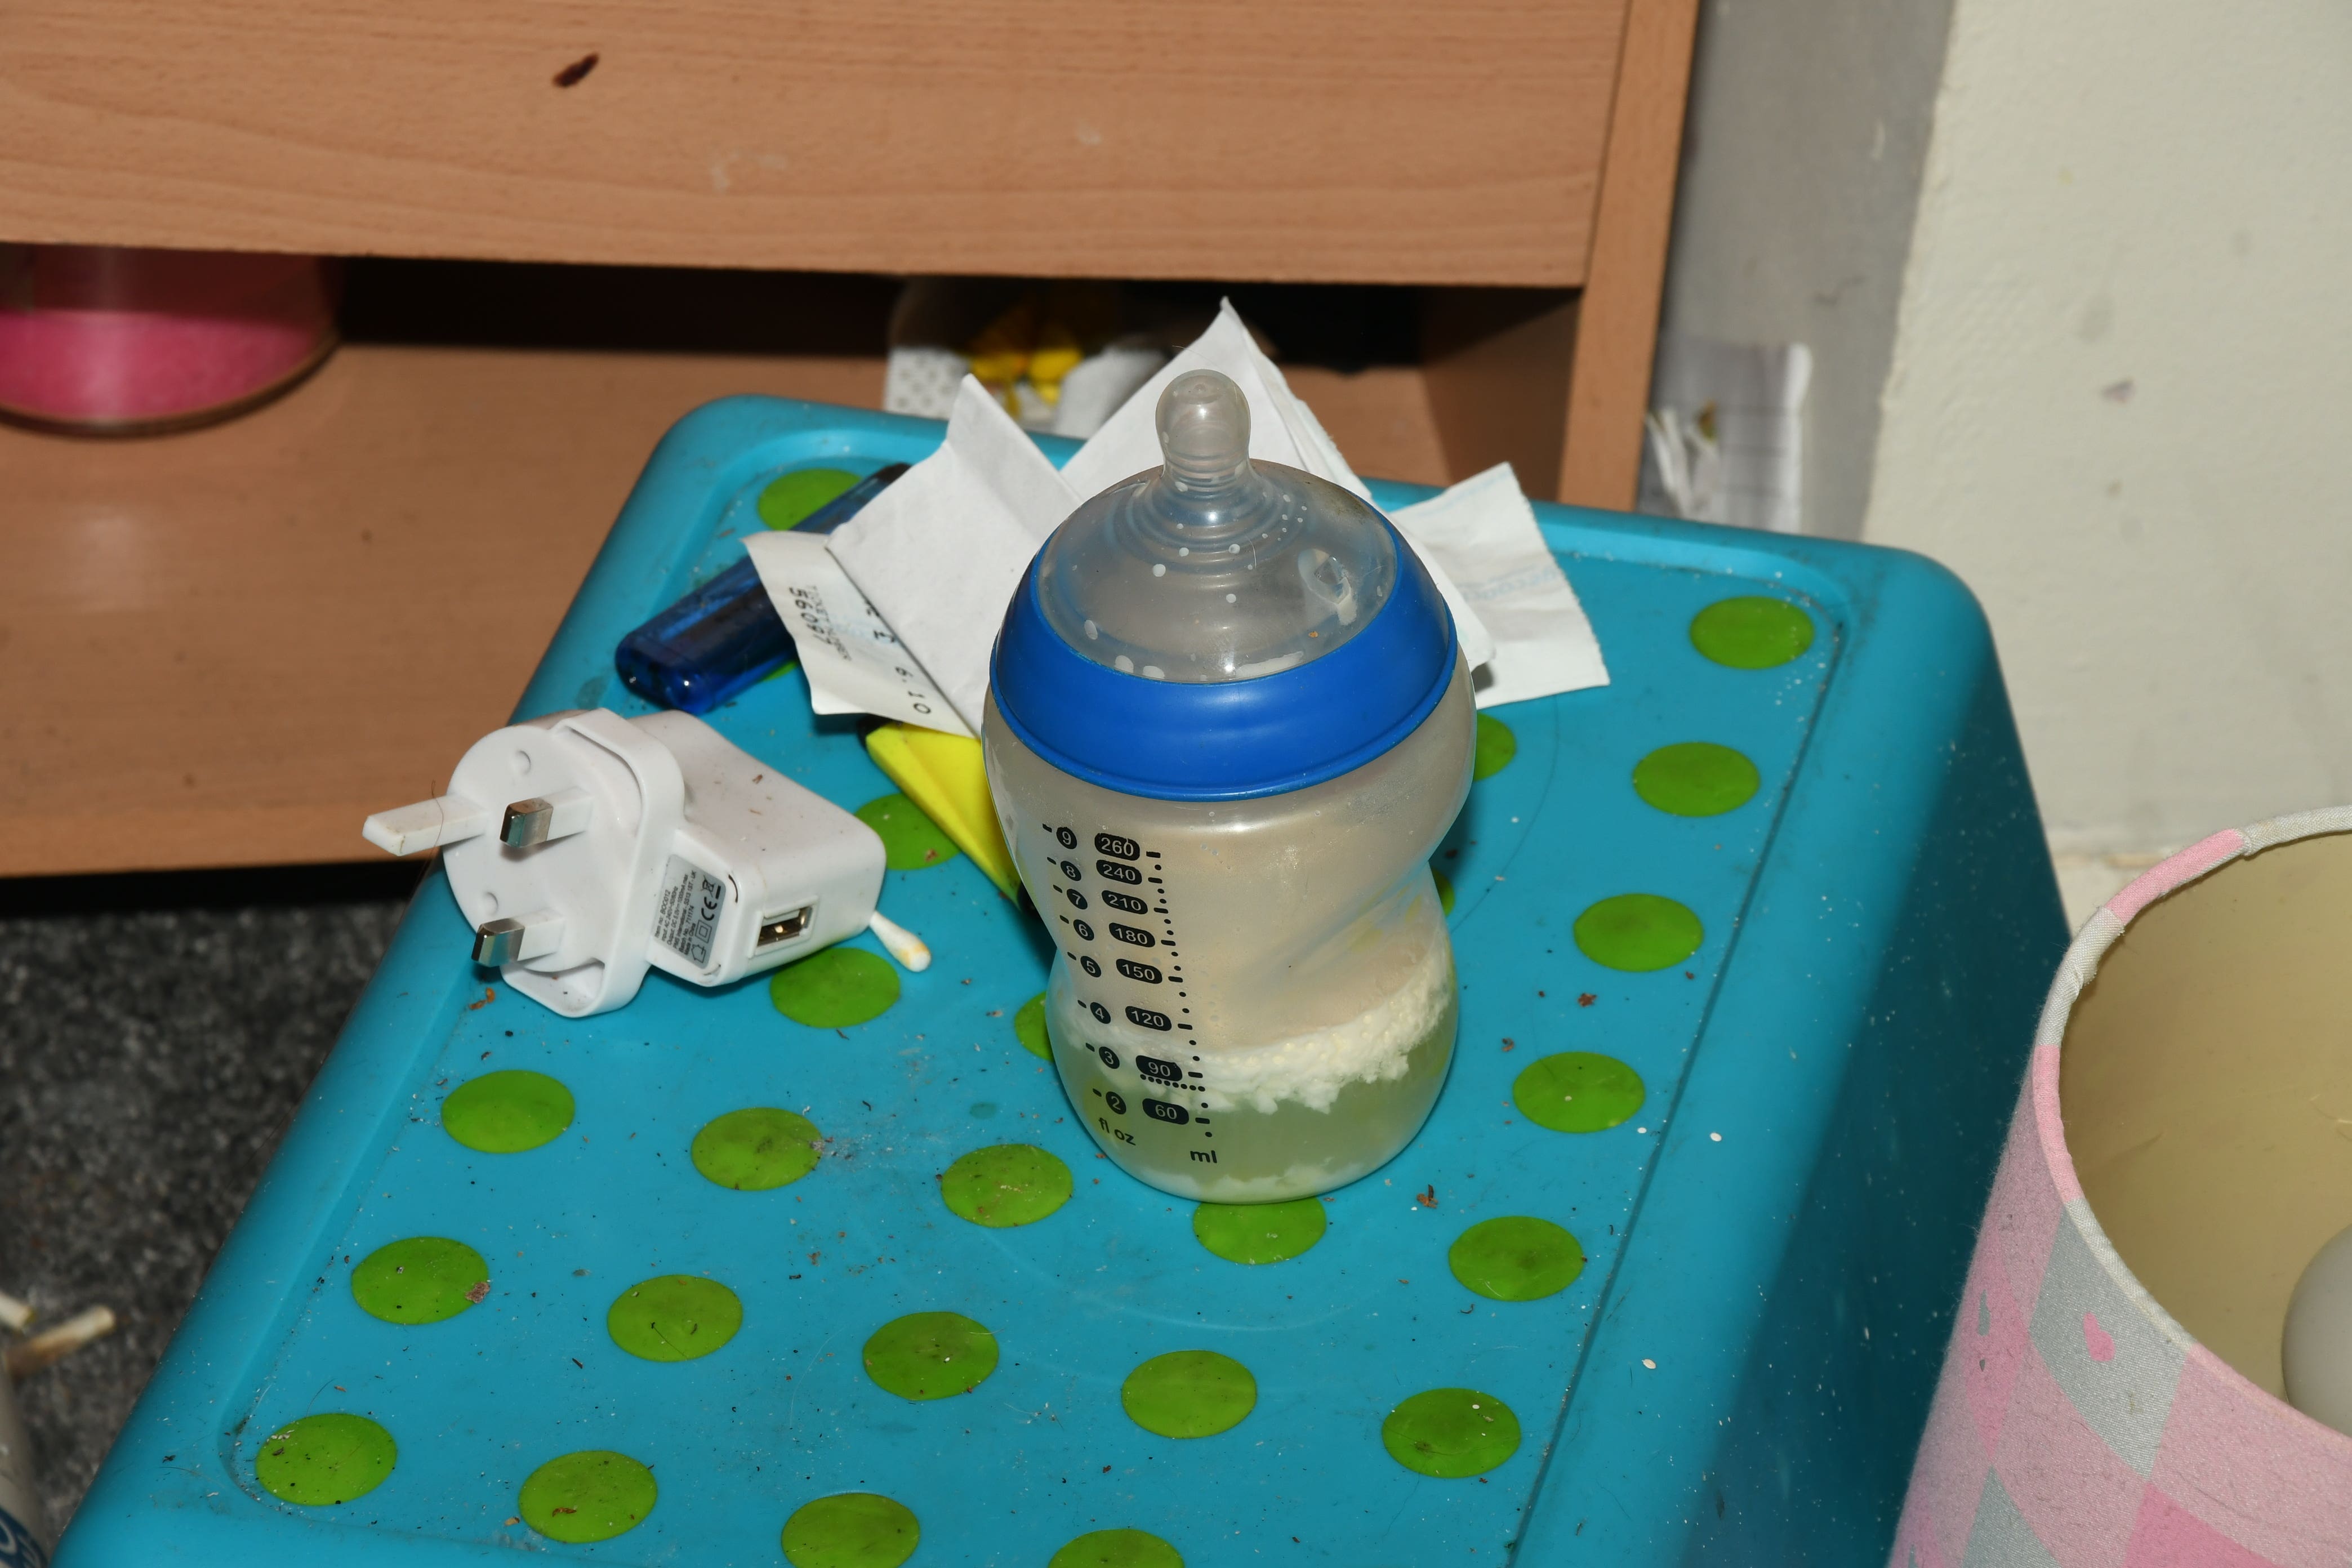 A baby bottle containing gone-off milk found by police (Derbyshire Police/PA)